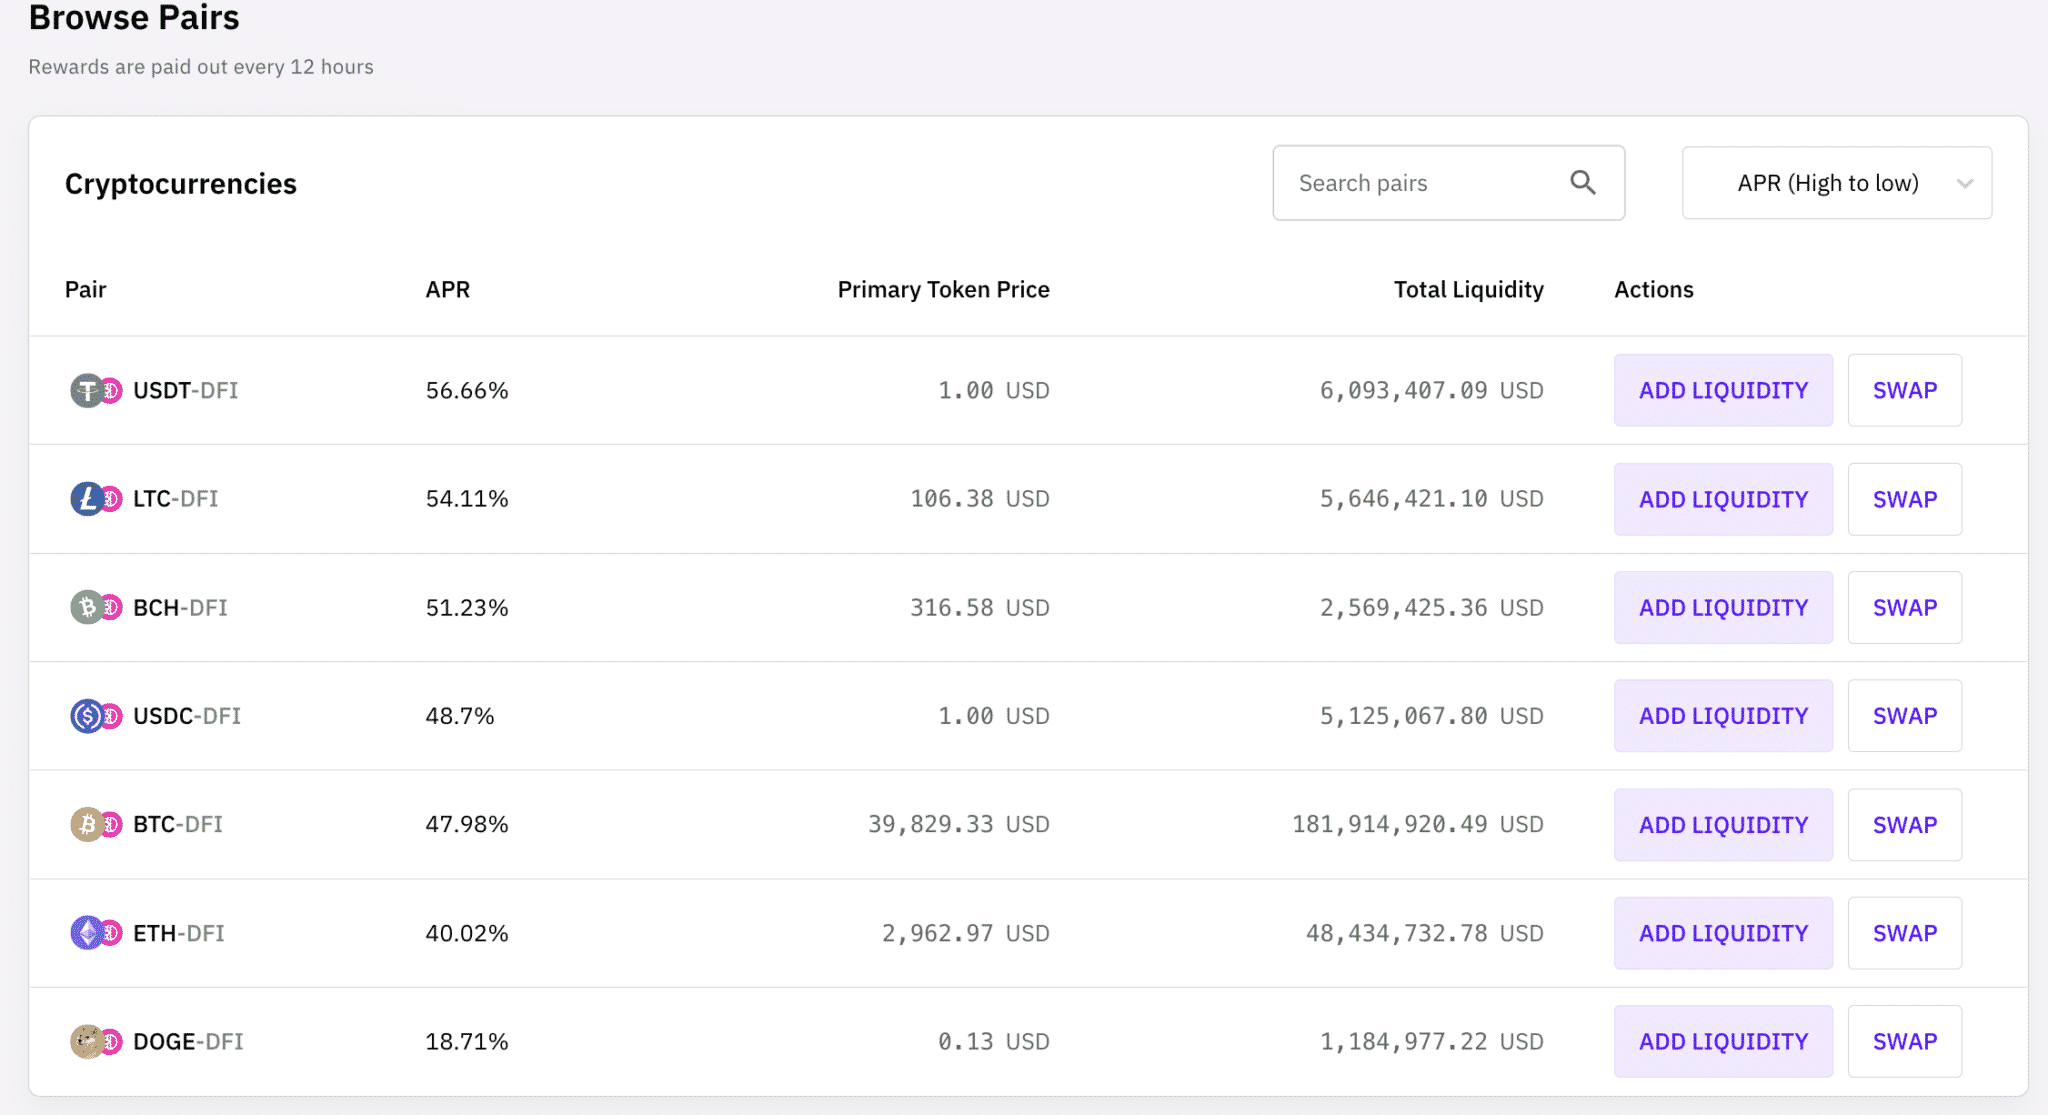 A snapshot of the Cake DeFi liquidity mining pools